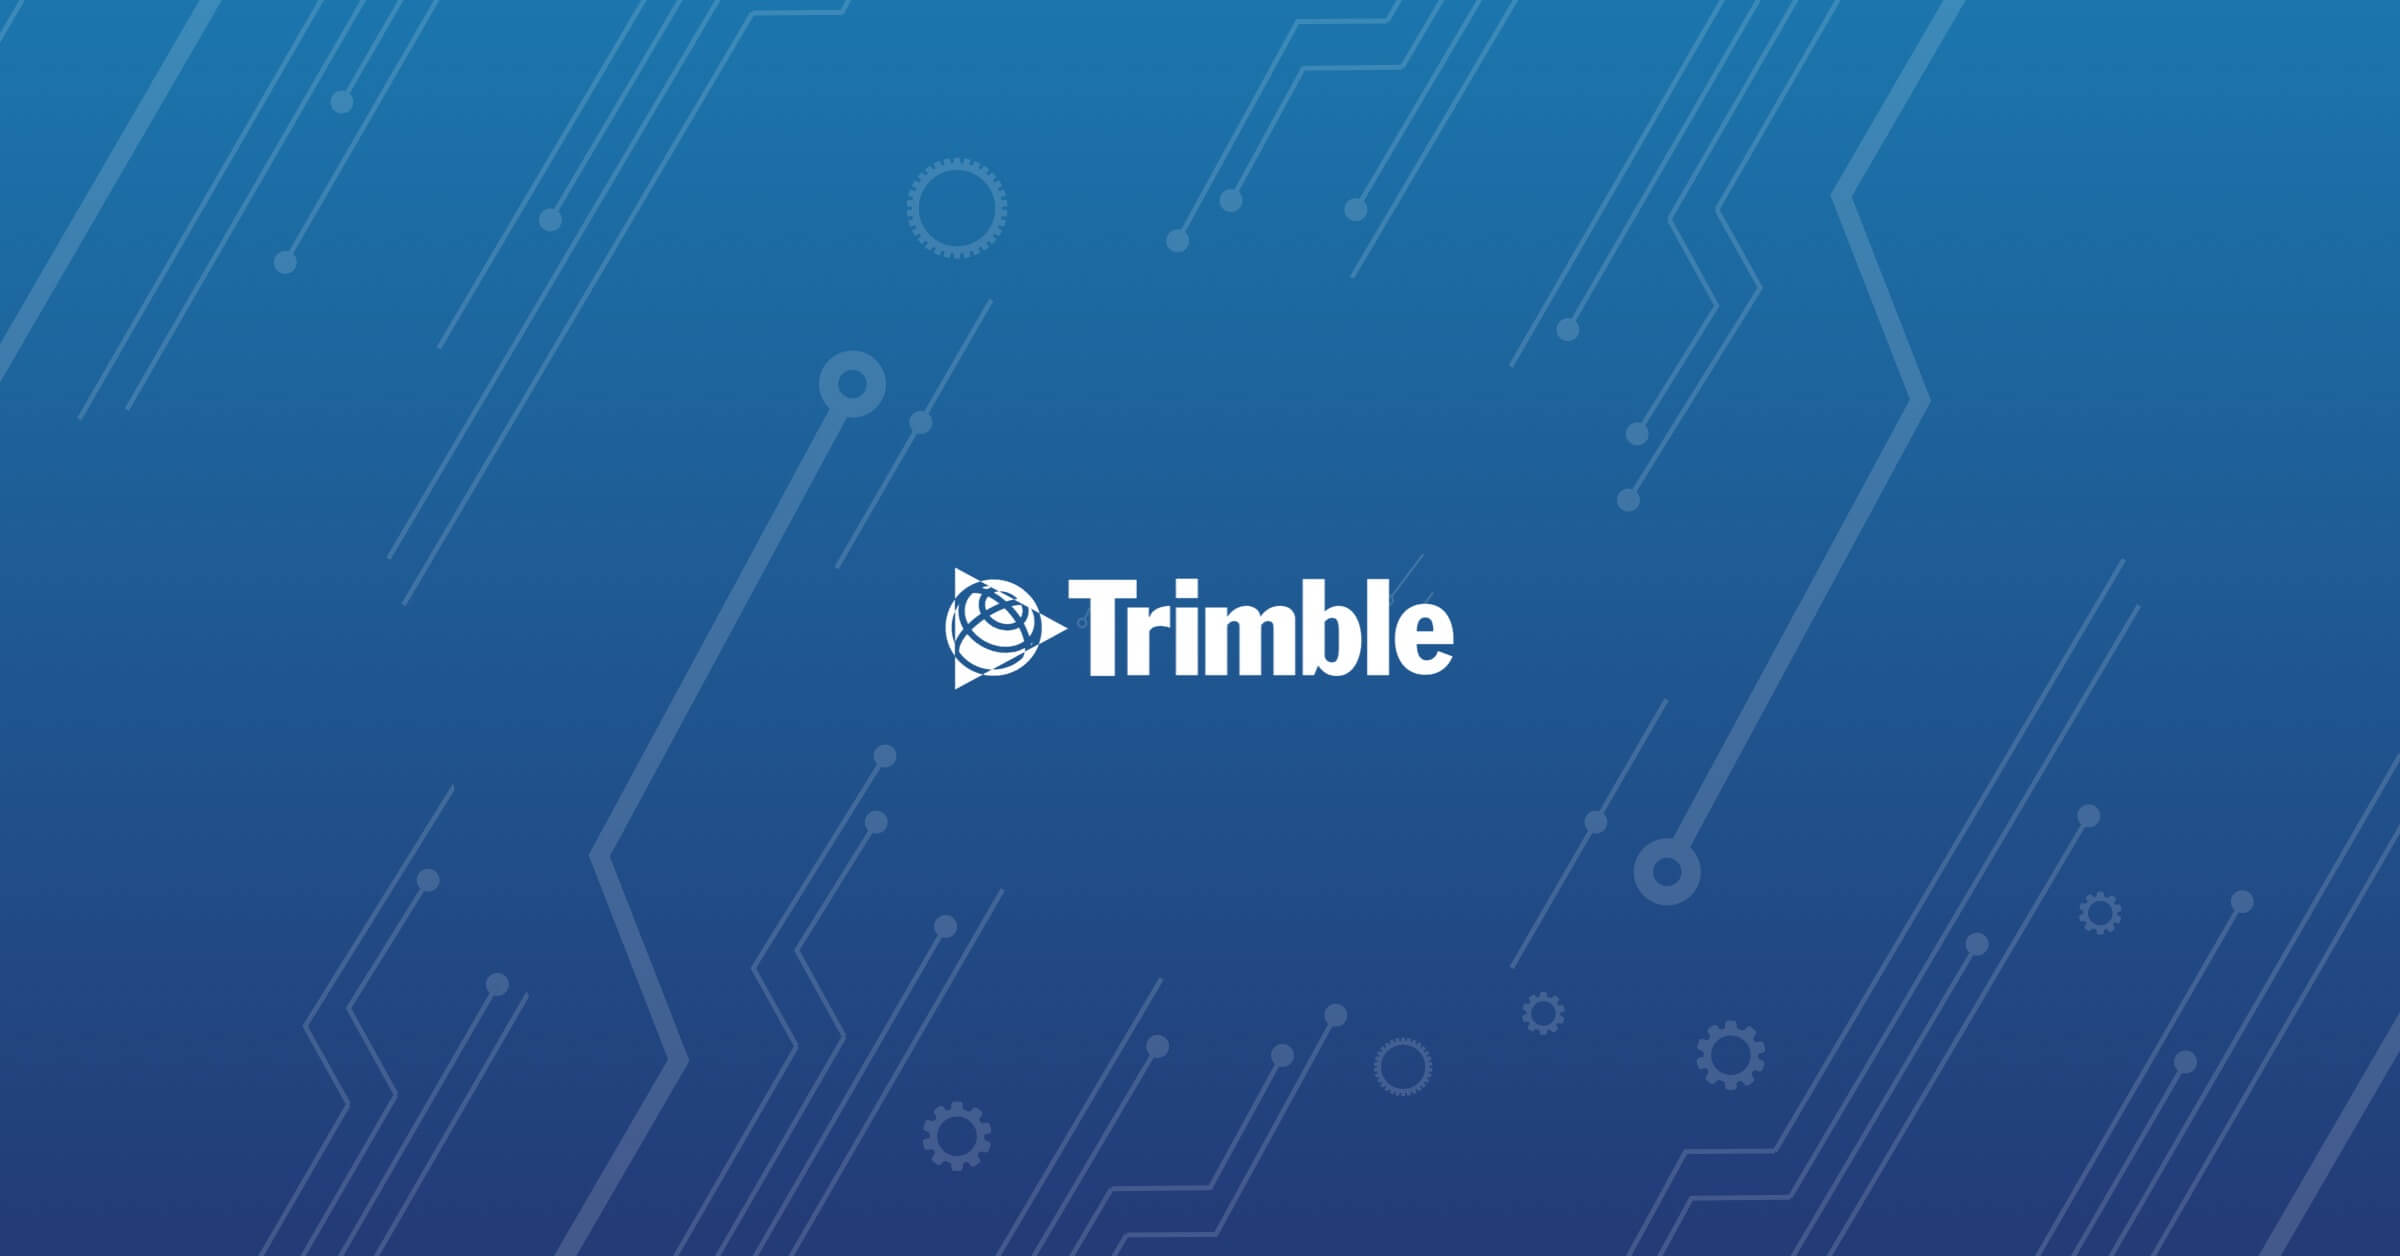 Trimble uses Happeo to digitally unite their workforce of over 11,000 employees